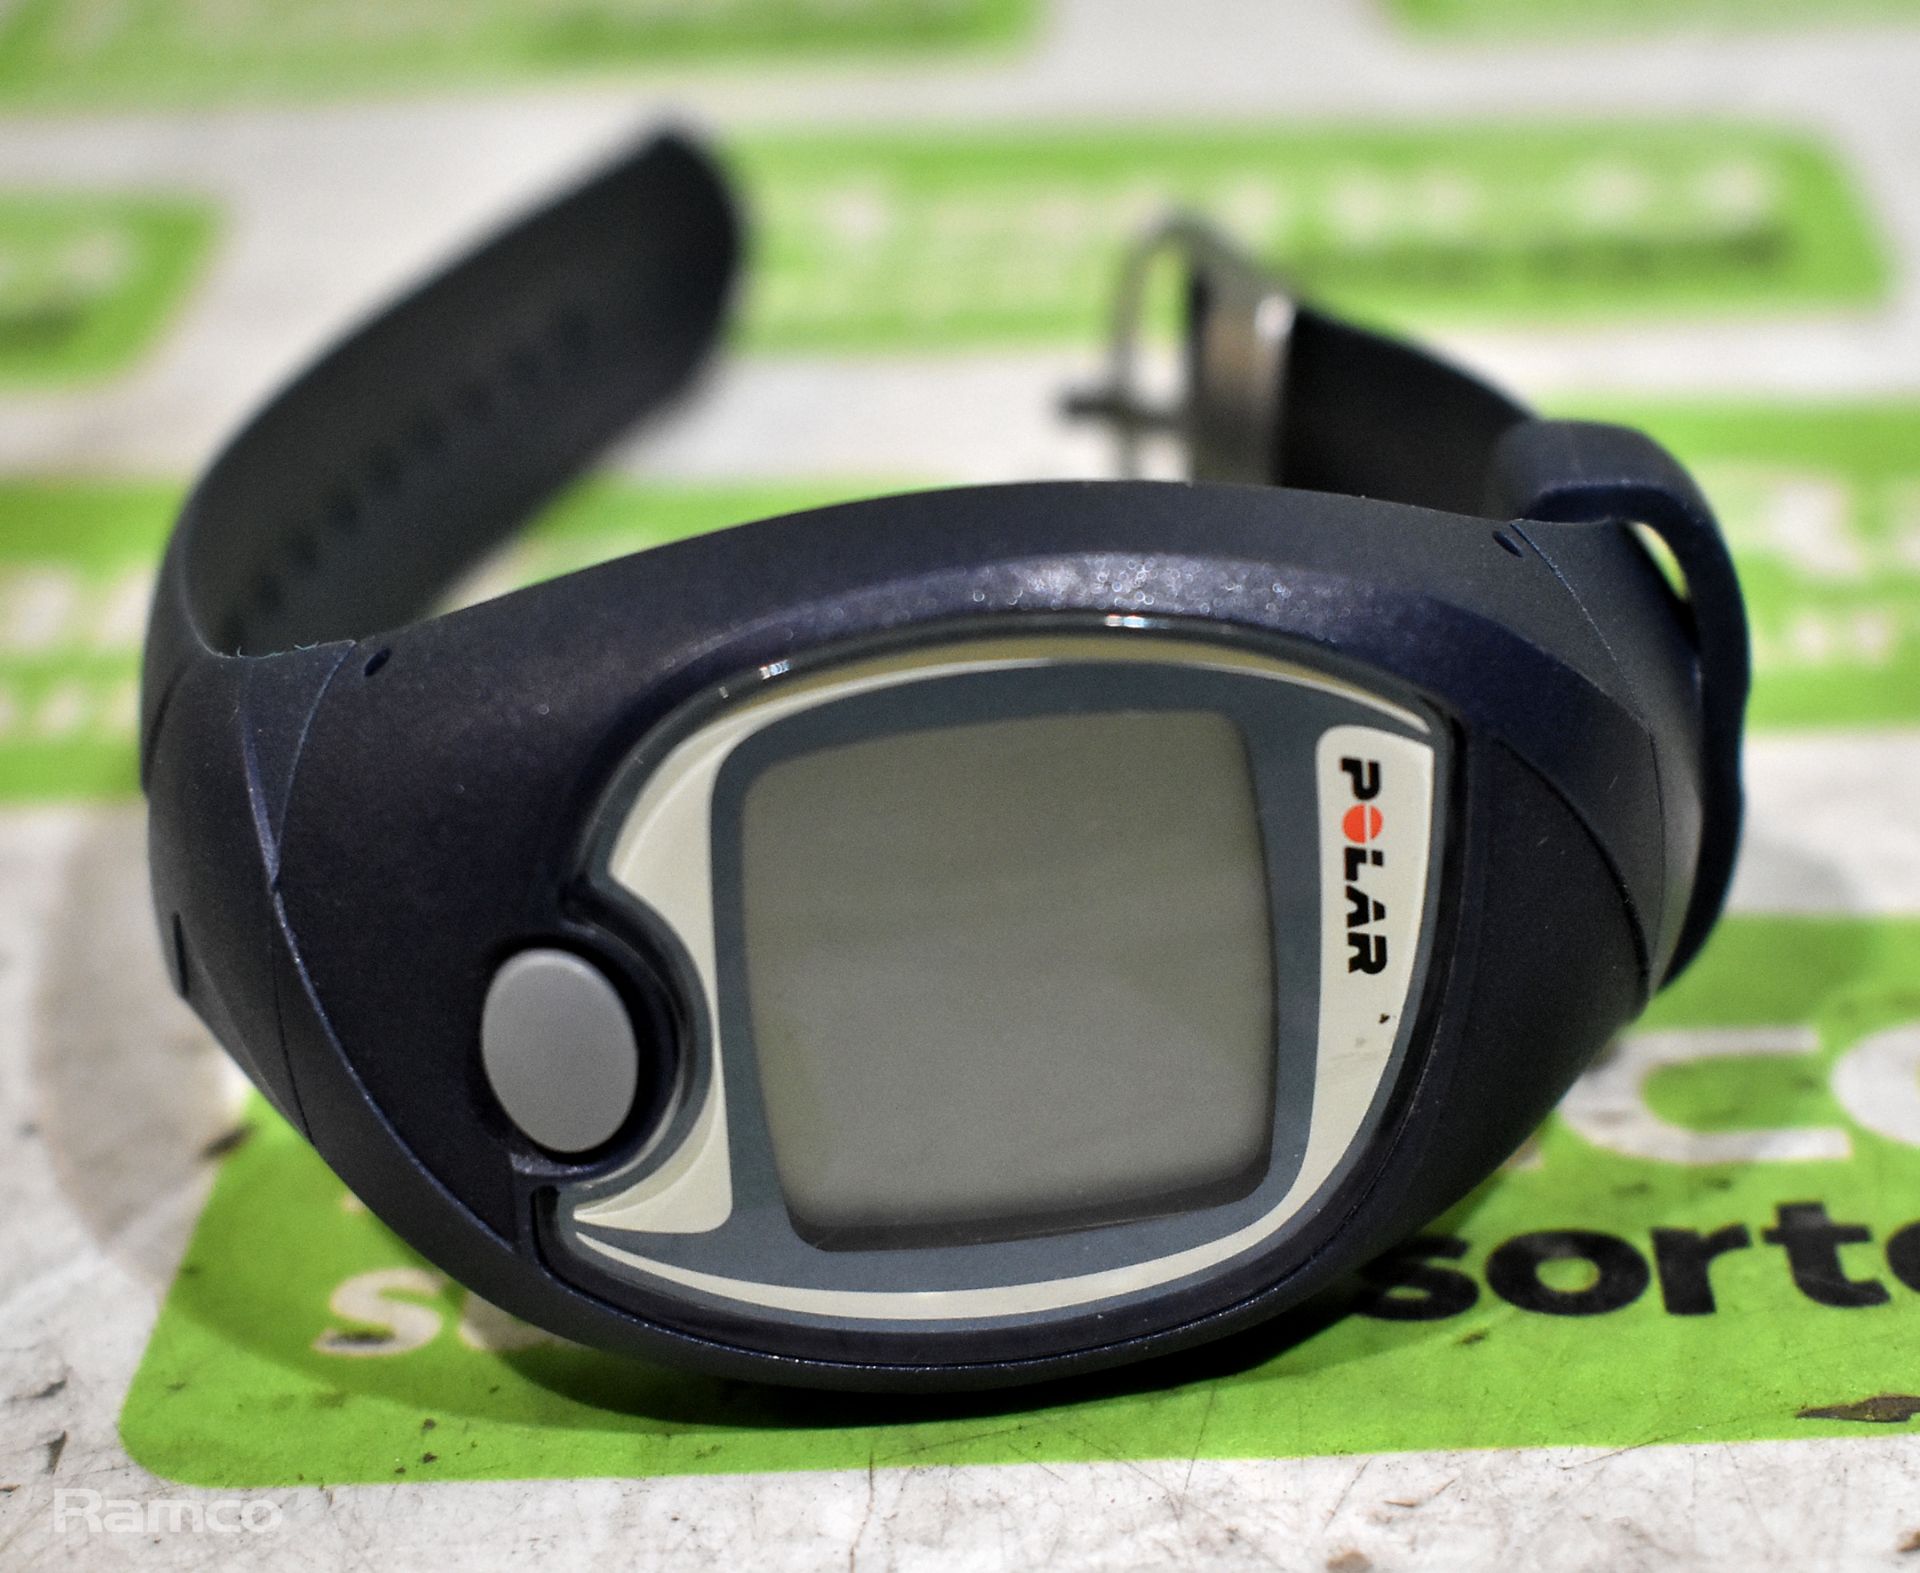 12x Polar FS1 heart rate monitor watches - Image 2 of 3